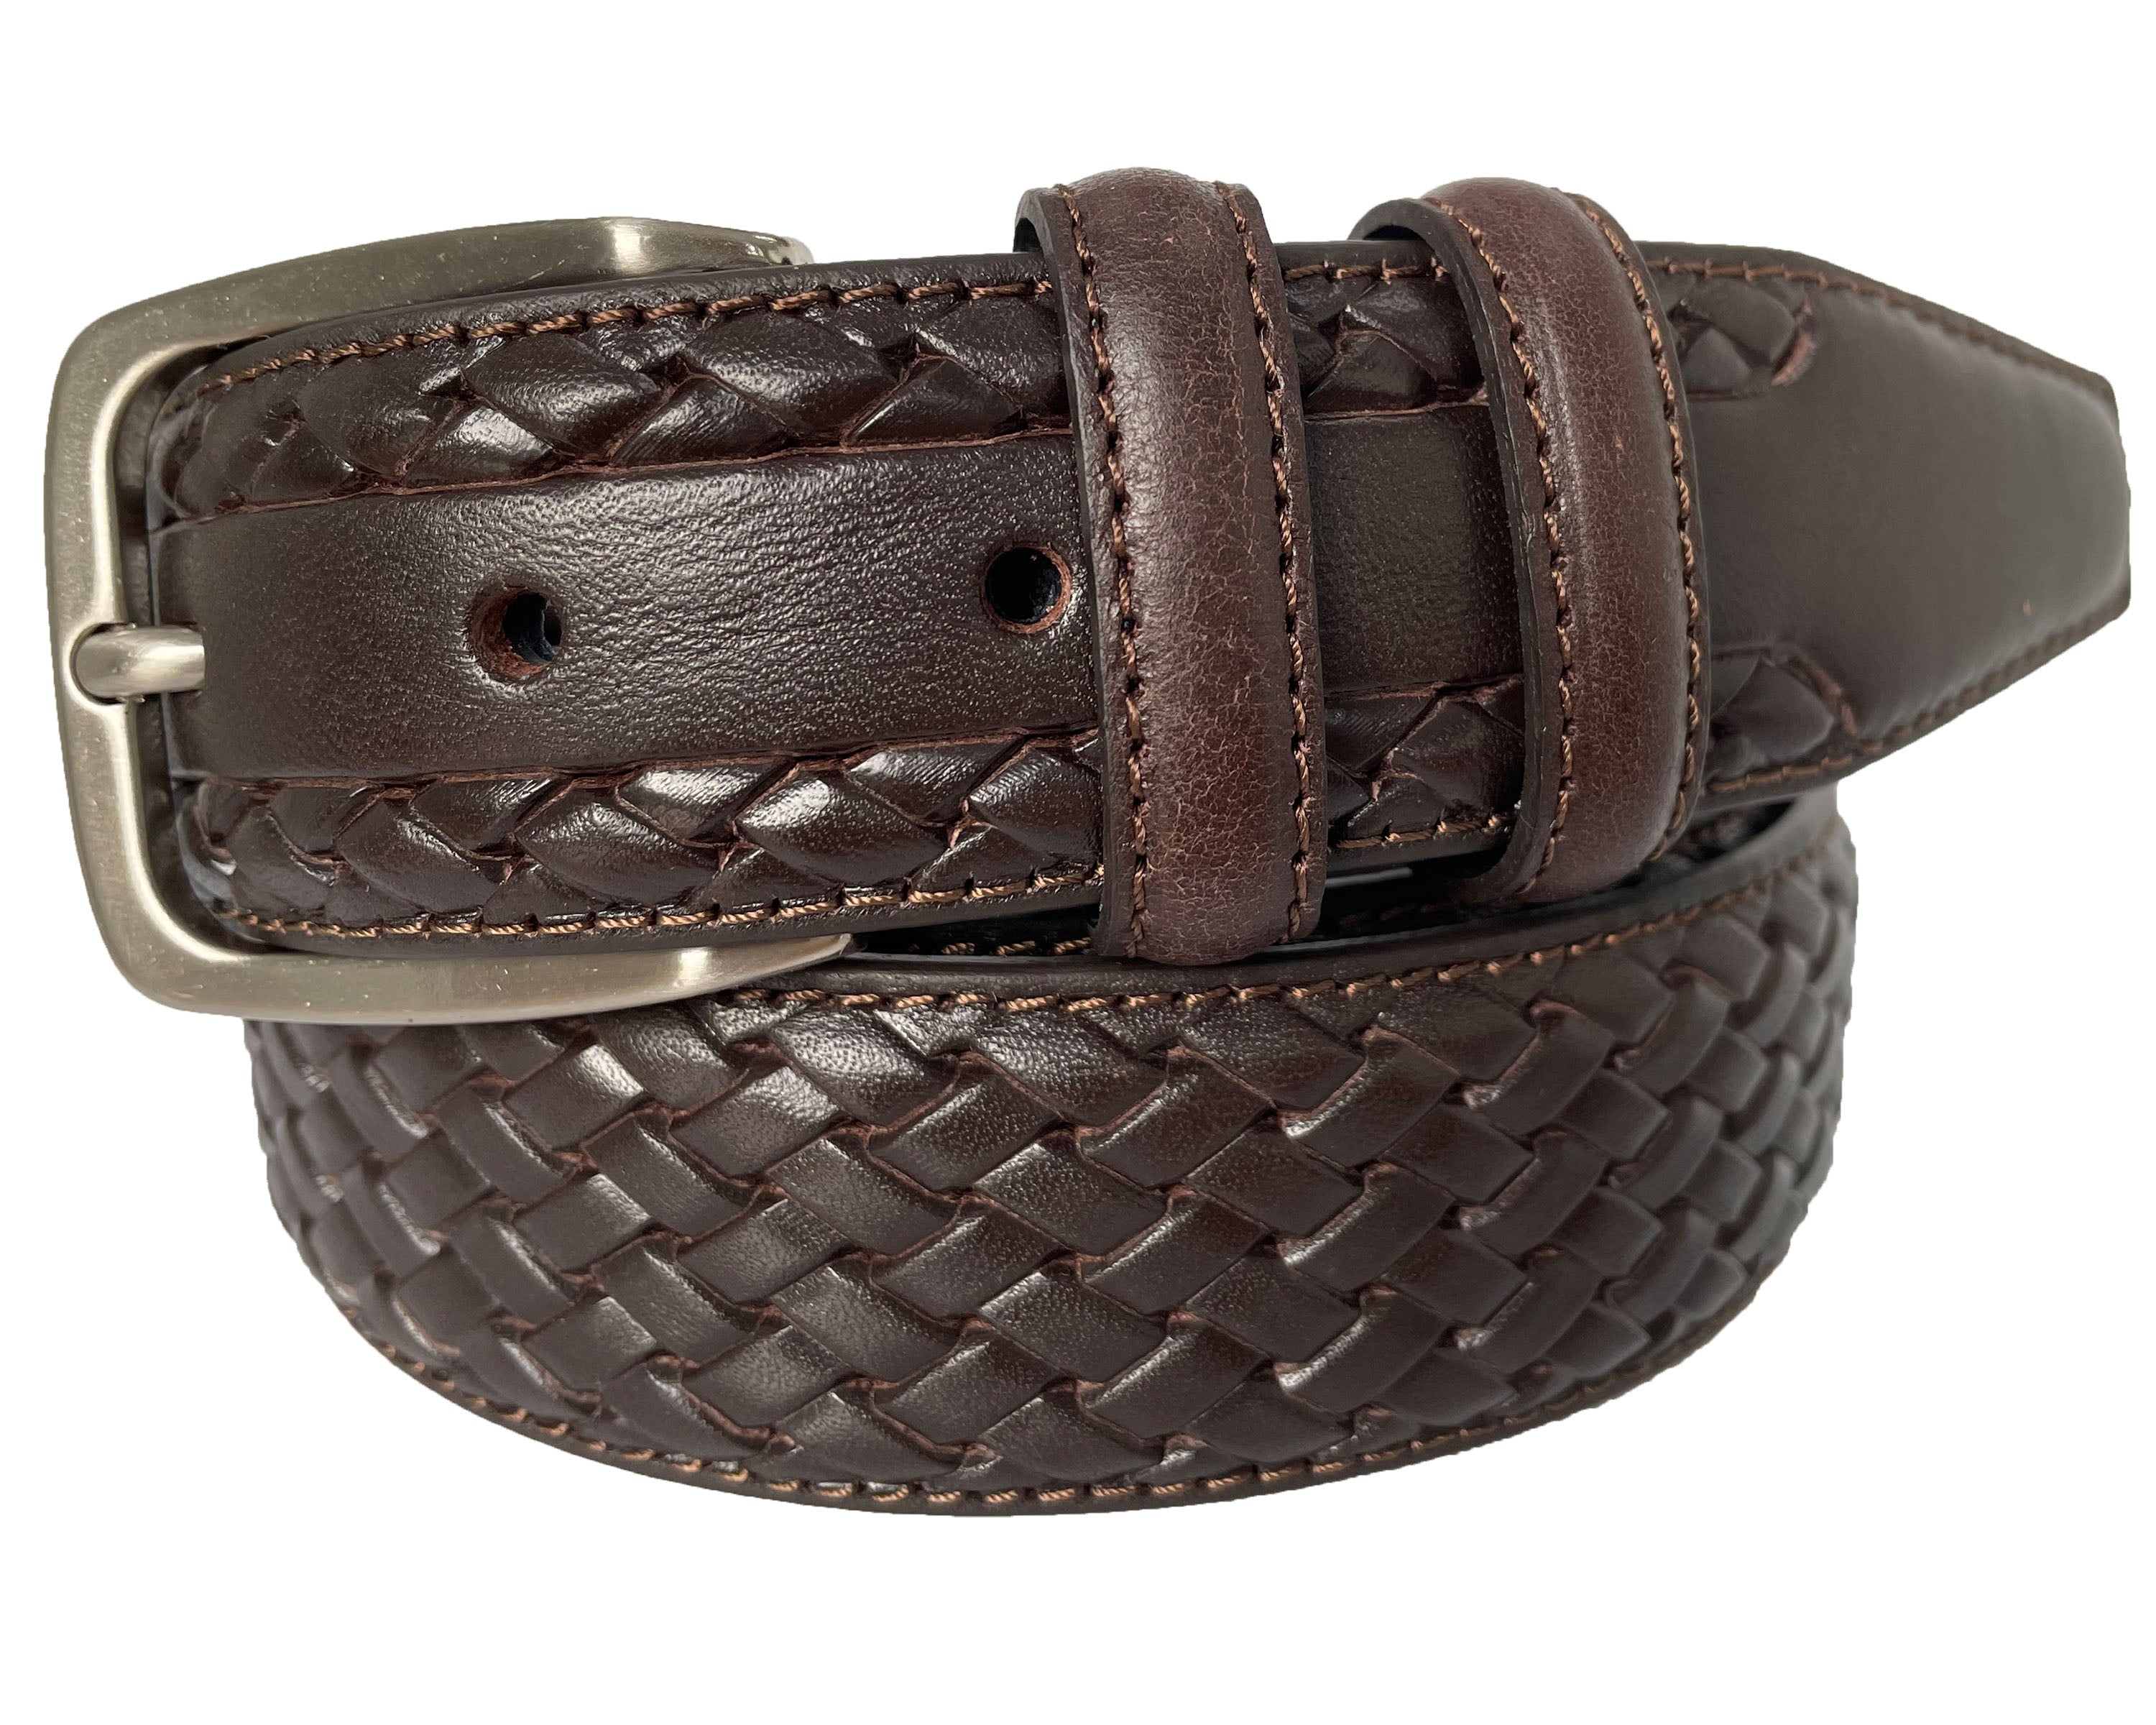 BROWN LEATHER BRAID WEAVE EMBOSSED 35MM LEATHER BELT